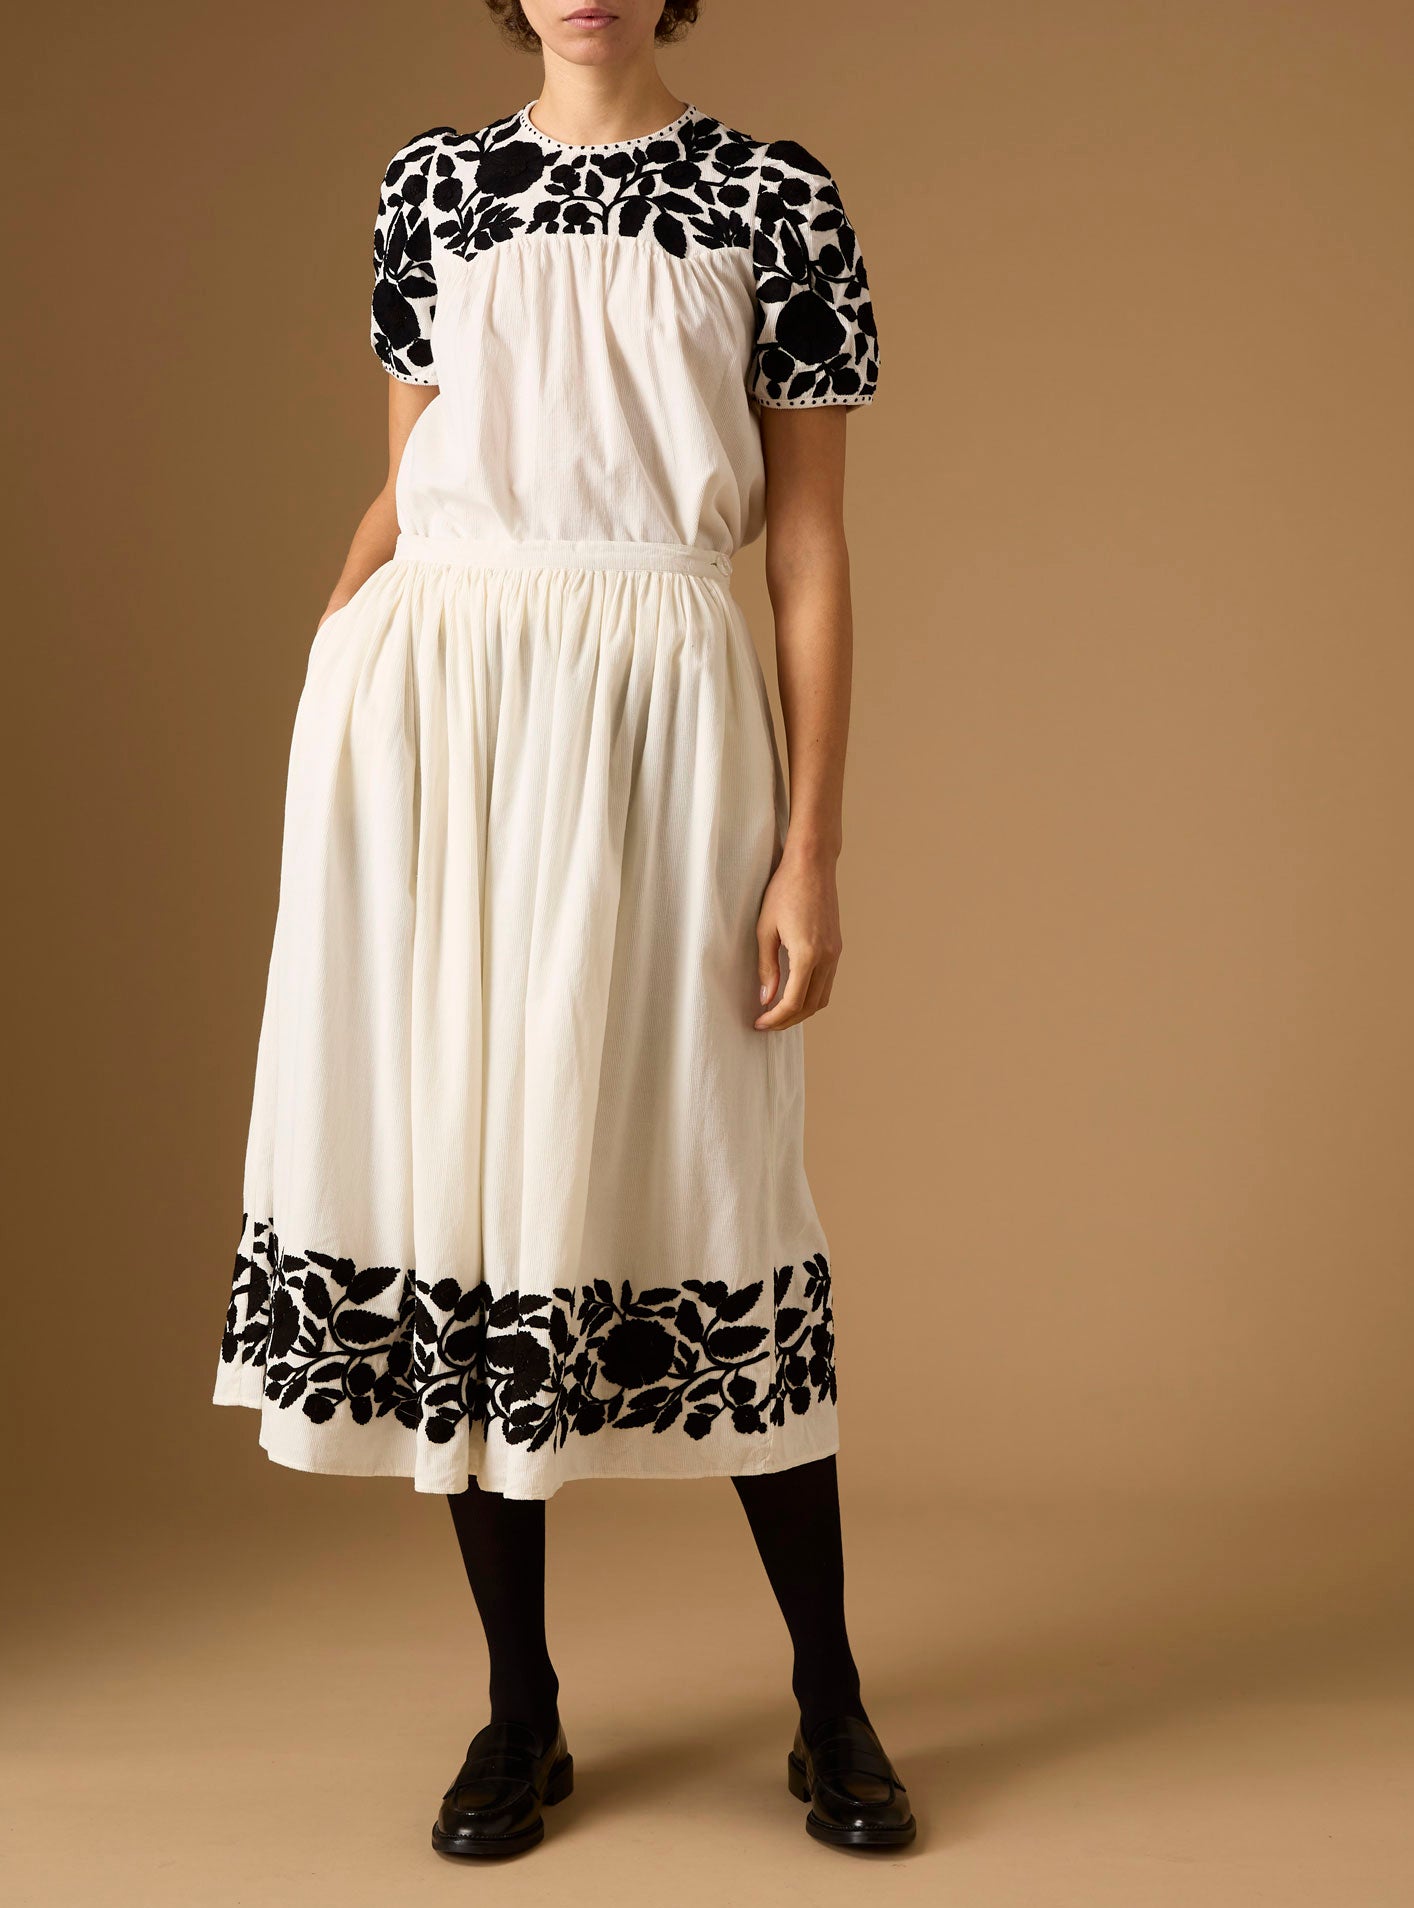 Front view of Olympia Embroidered Corduroy Cream/Black Top with skirt by Thierry Colson 